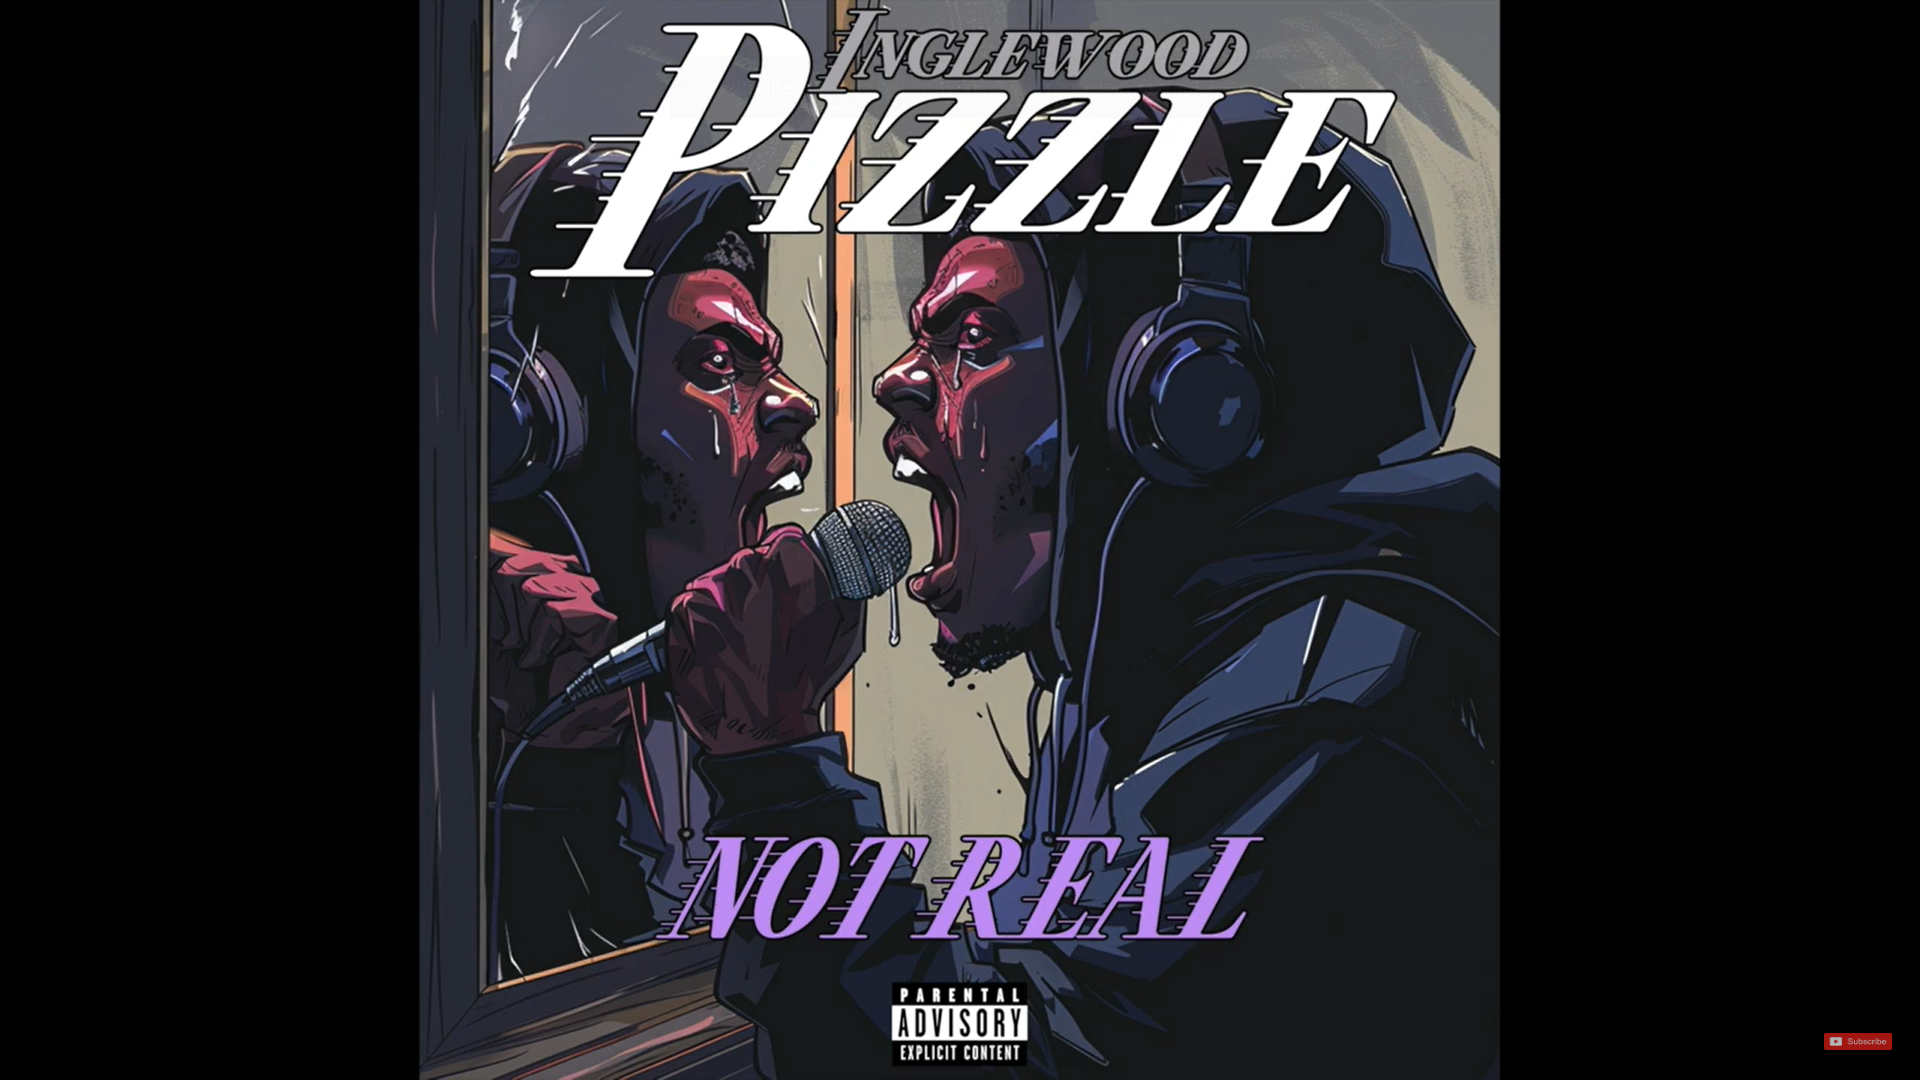 Inglewood PIZZLE – Not Real (Prod. By 88Keyz)